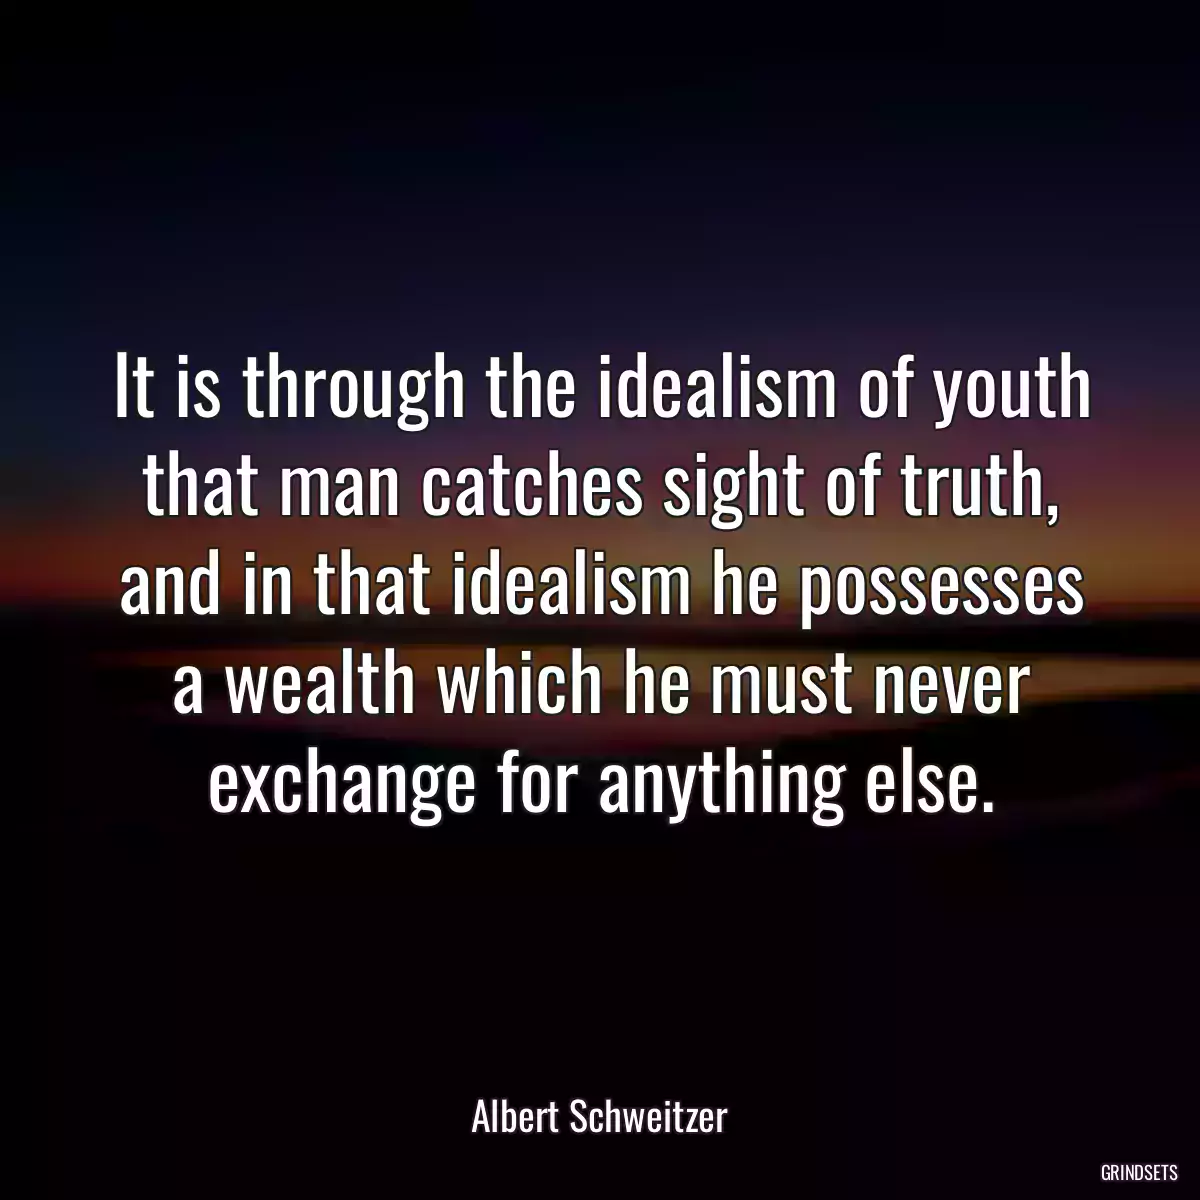 It is through the idealism of youth that man catches sight of truth, and in that idealism he possesses a wealth which he must never exchange for anything else.